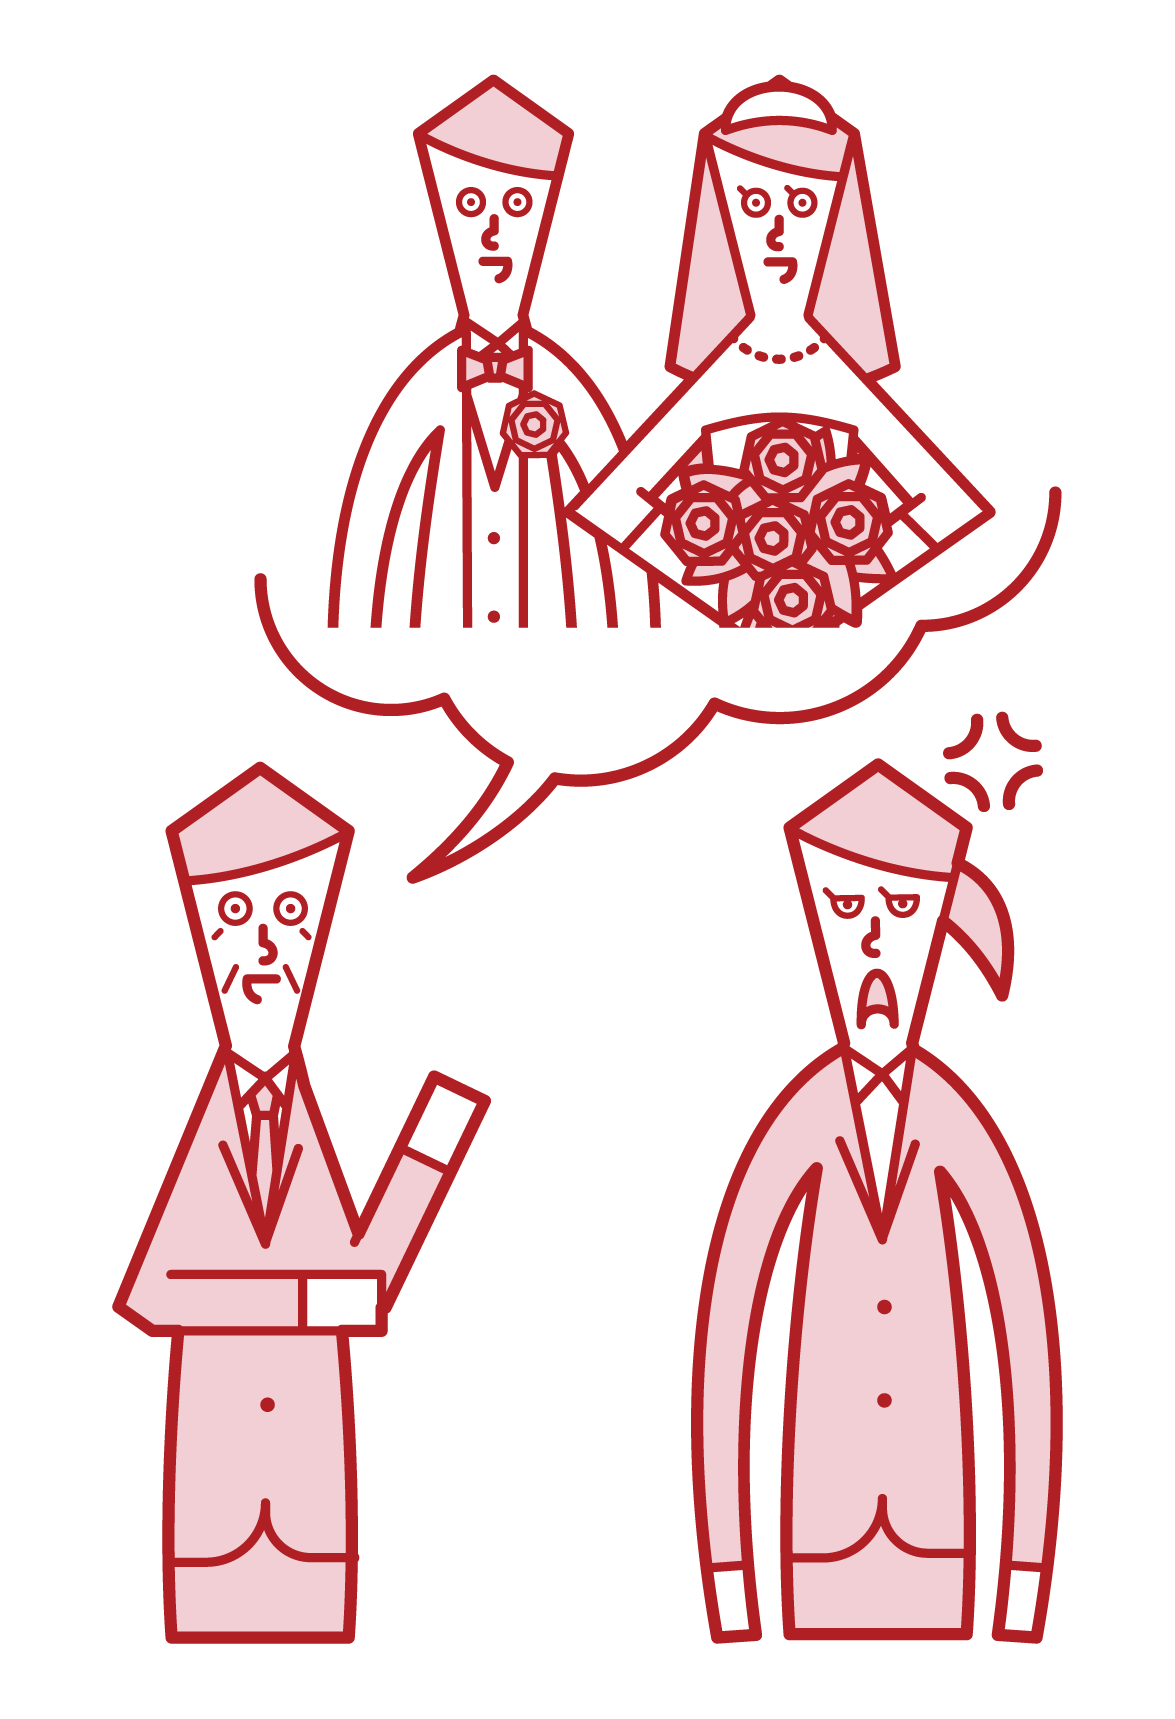 Illustration of a person (grandfather) who is harassing marriage